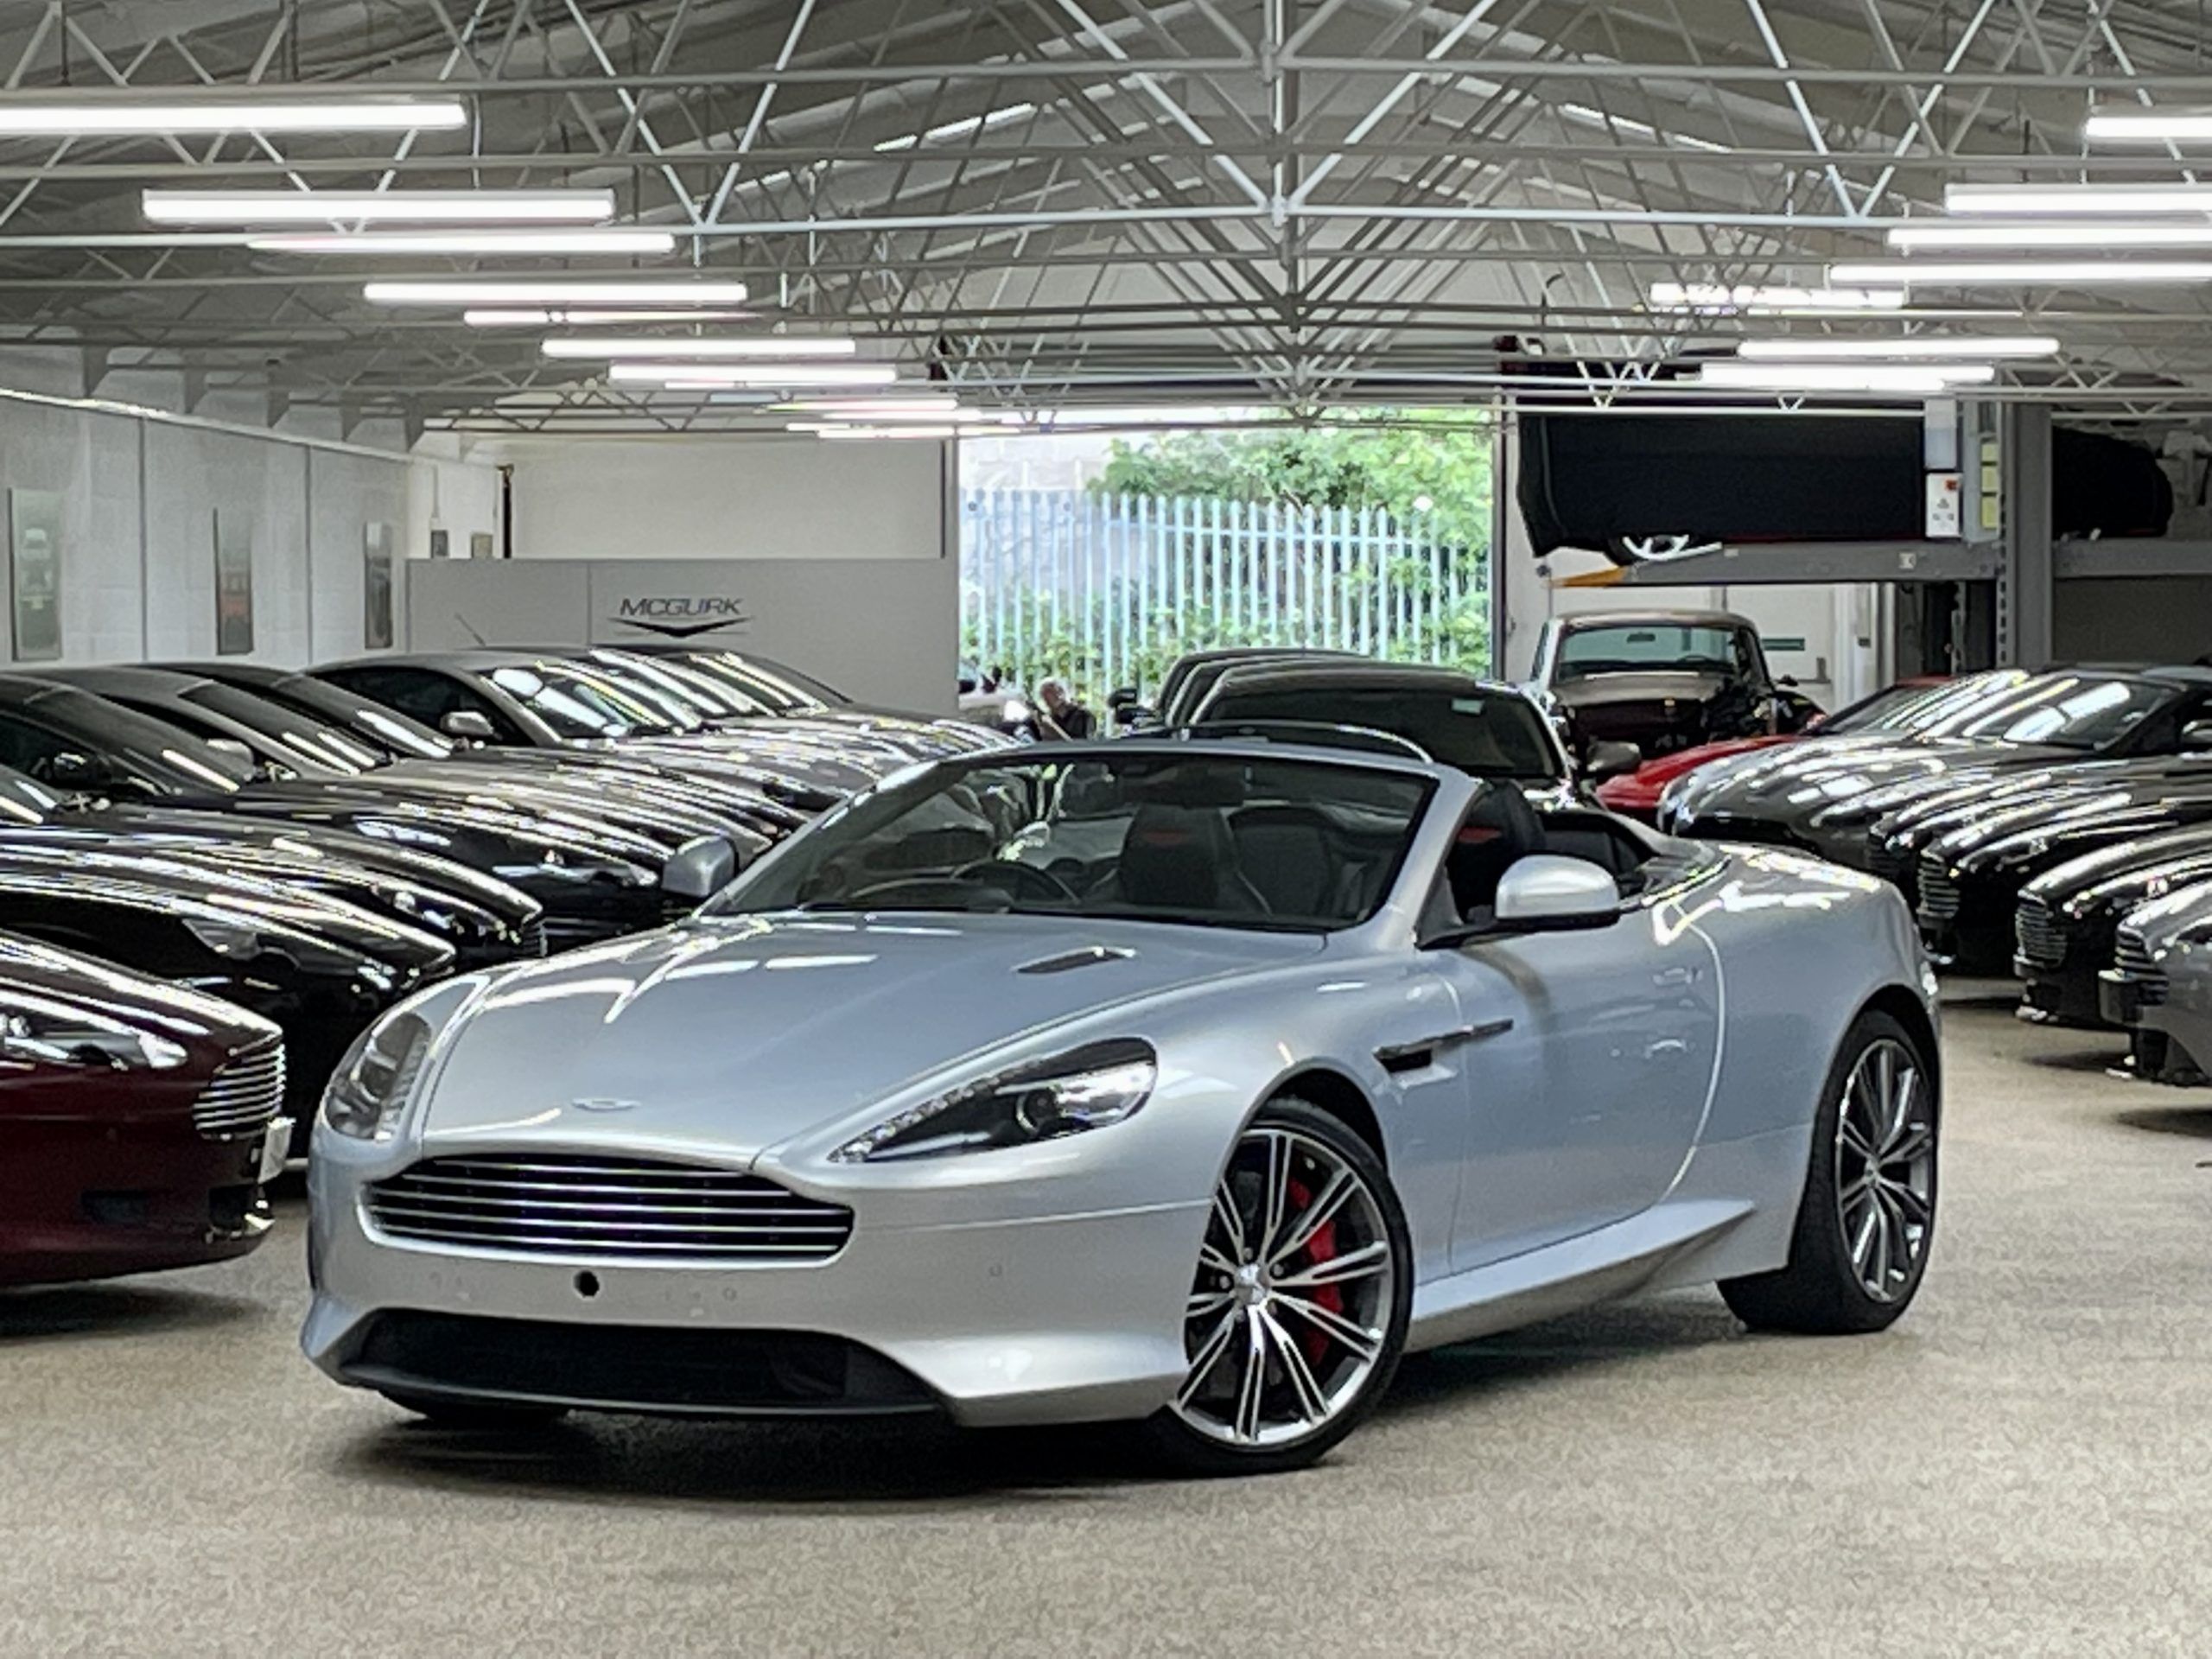 Used DB9 Volante For sale